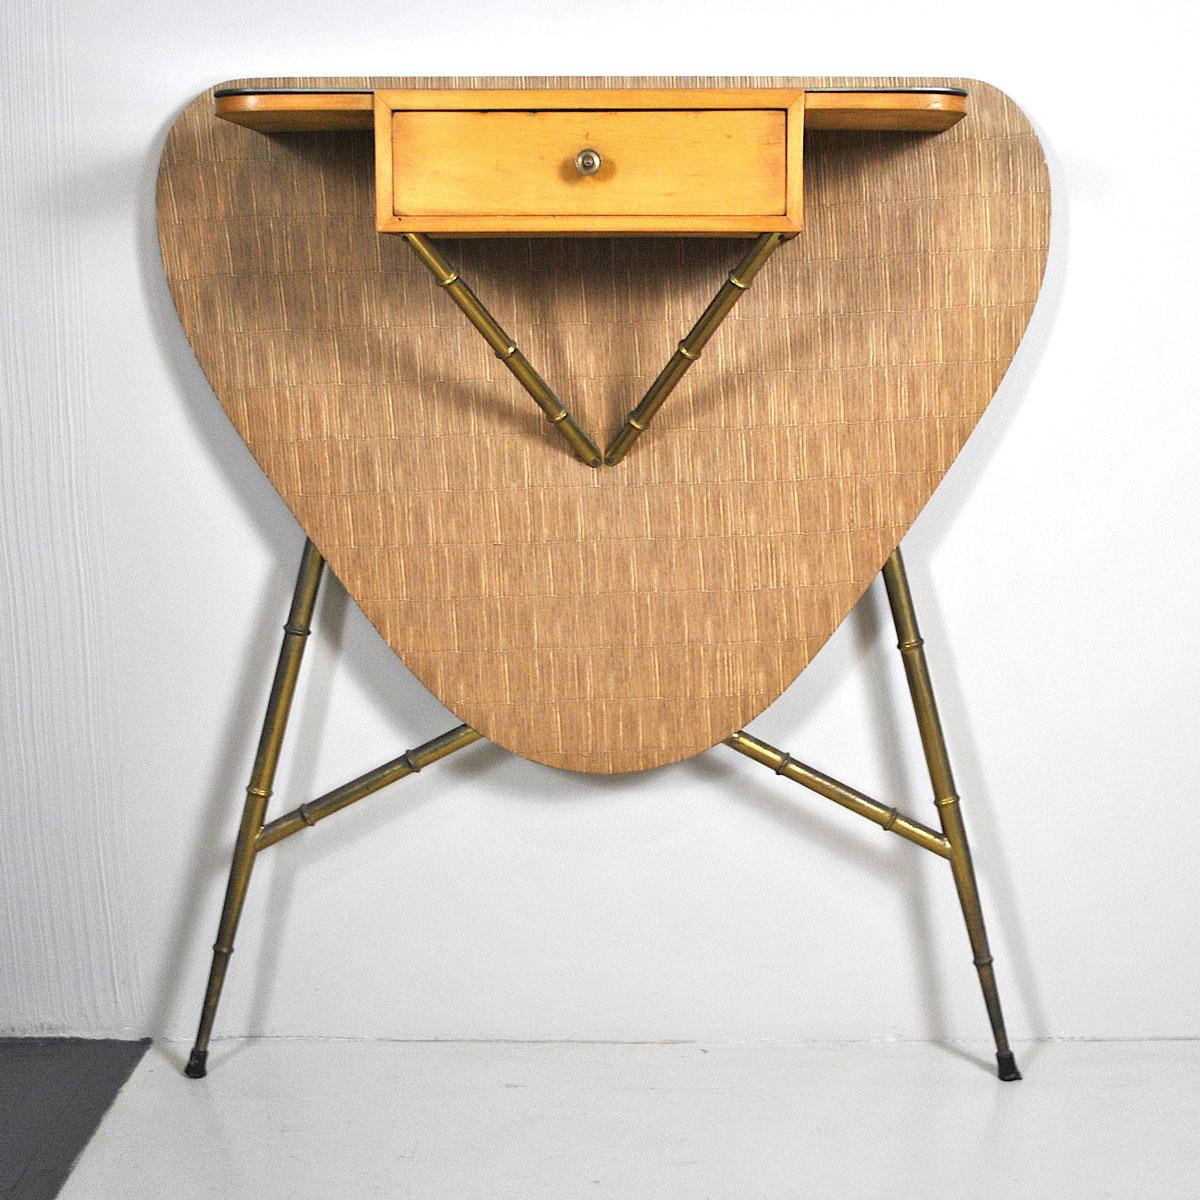 Italian Midcentury 1960s Consolle in Brass and Wood For Sale 4